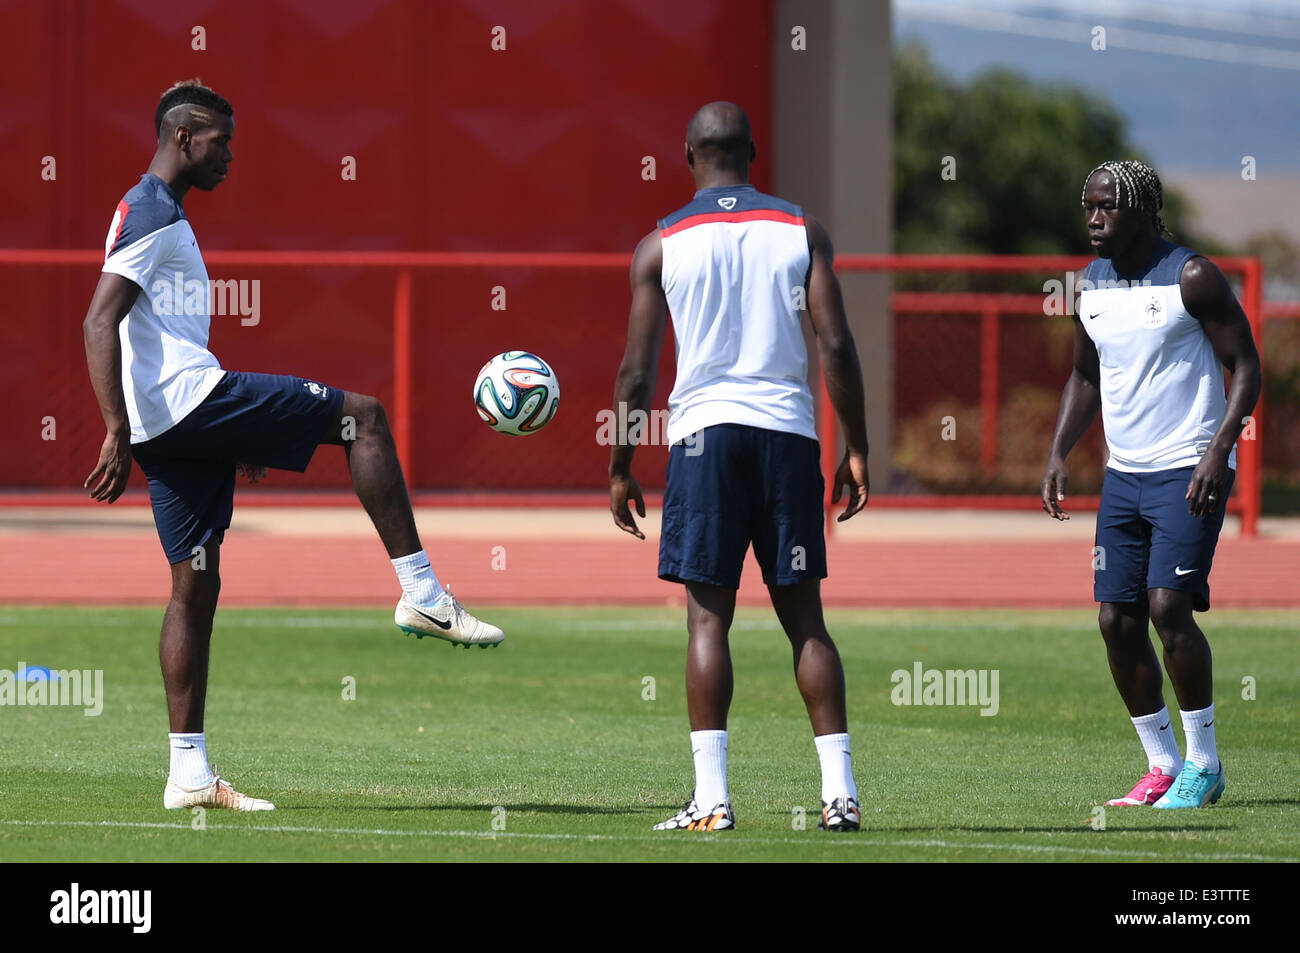 Brasilia, Brazil. 29th June, 2014. France's national soccer players Paul Pogba (L) and Bacary Sagna (R) during a training session at the Centro de Capacitacao Fisica dos Bombeiros in Brasilia, Brazil, 29 June 2014. France will face Nigeria in the FIFA World Cup 2014 round of 16 match in Brasilia on 30 June 2014. Photo: Marius Becker/dpa/Alamy Live News Stock Photo